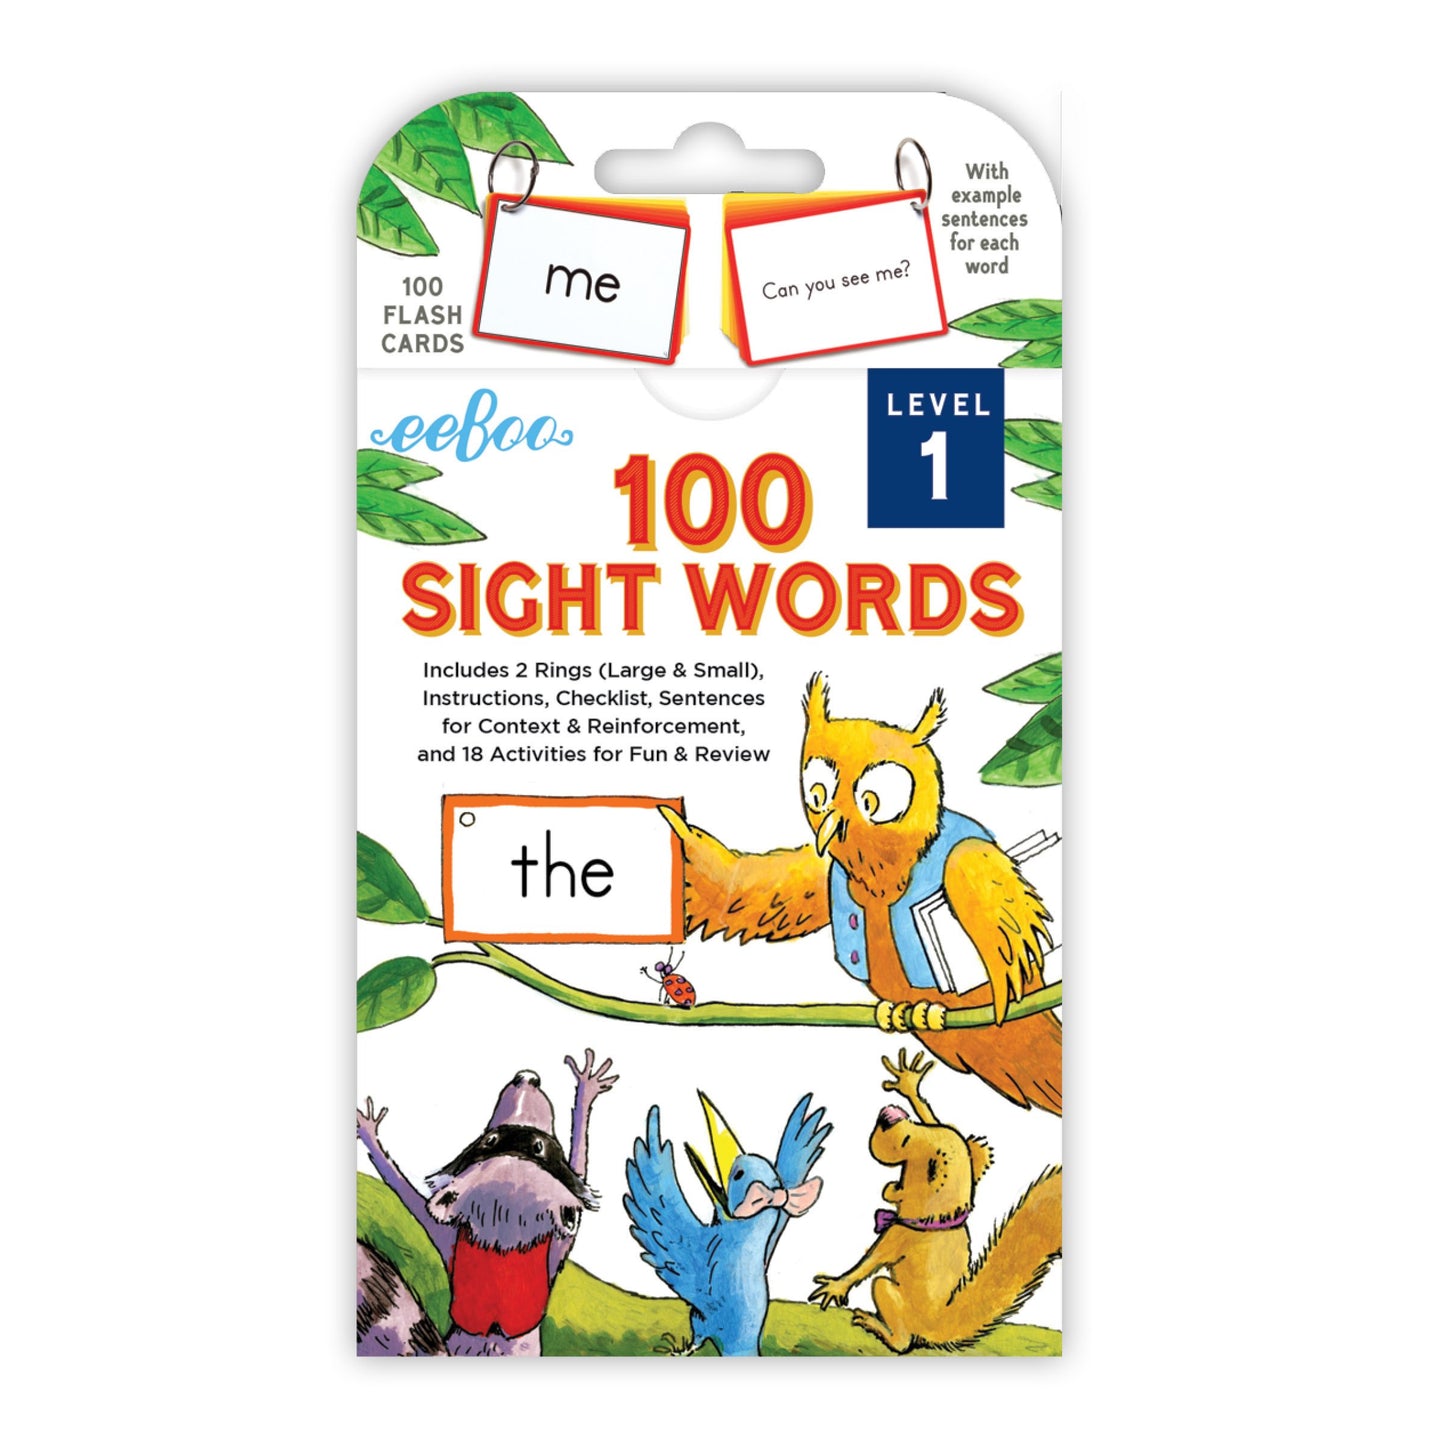 100 Sight Words Flash Cards, Level 1